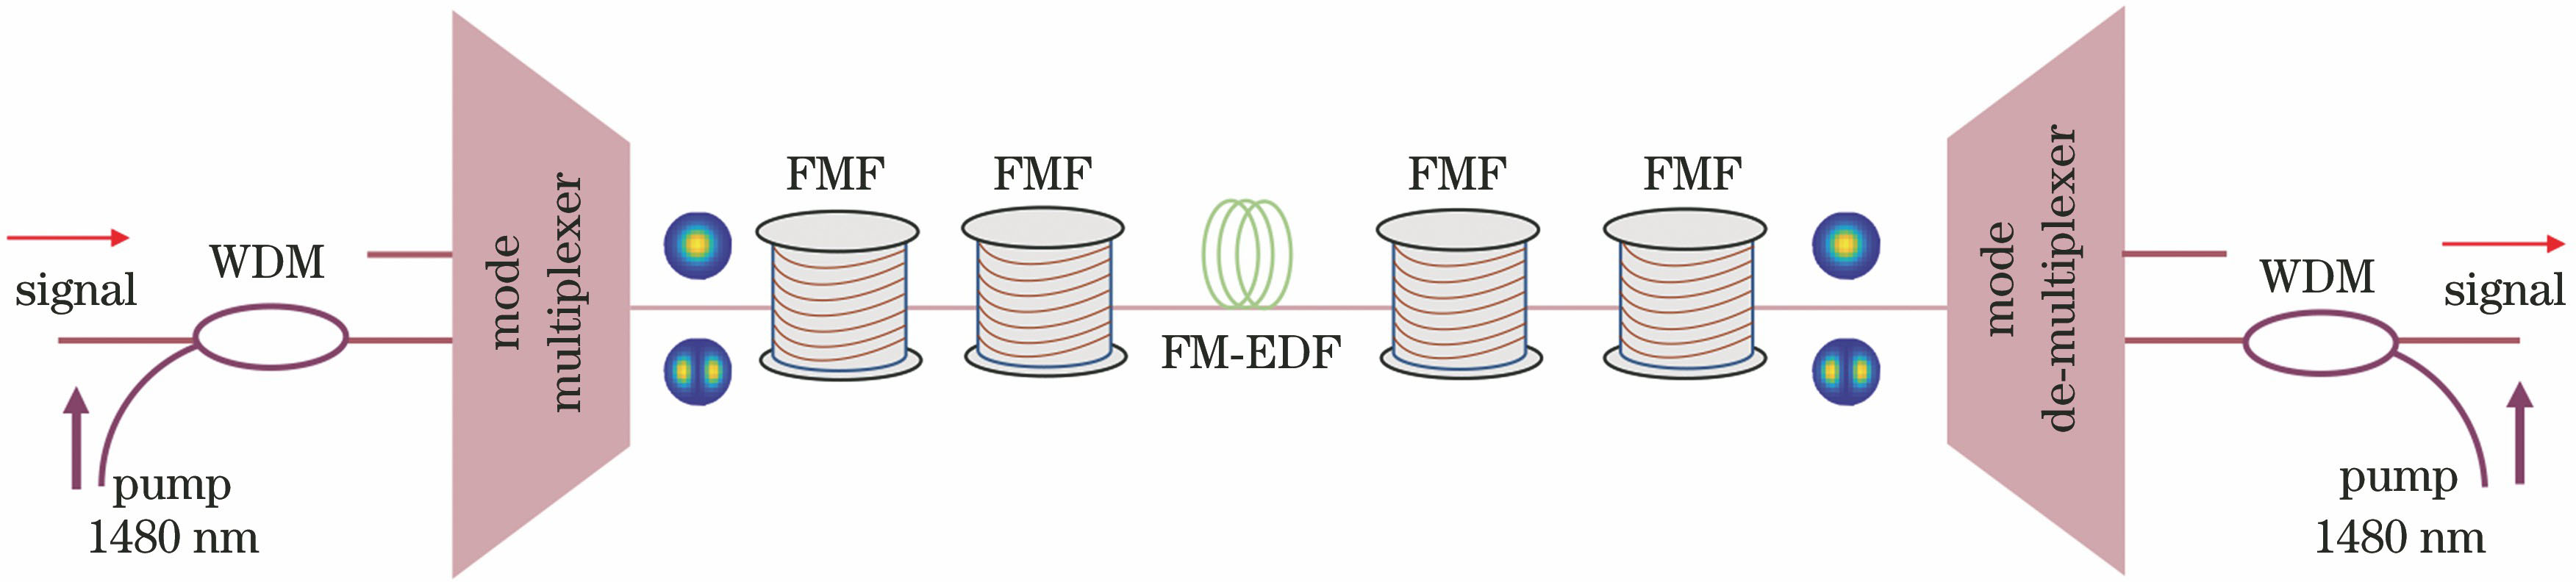 Schematic of forward remotely pumped few-mode fiber amplifier with two-signal mode transmission